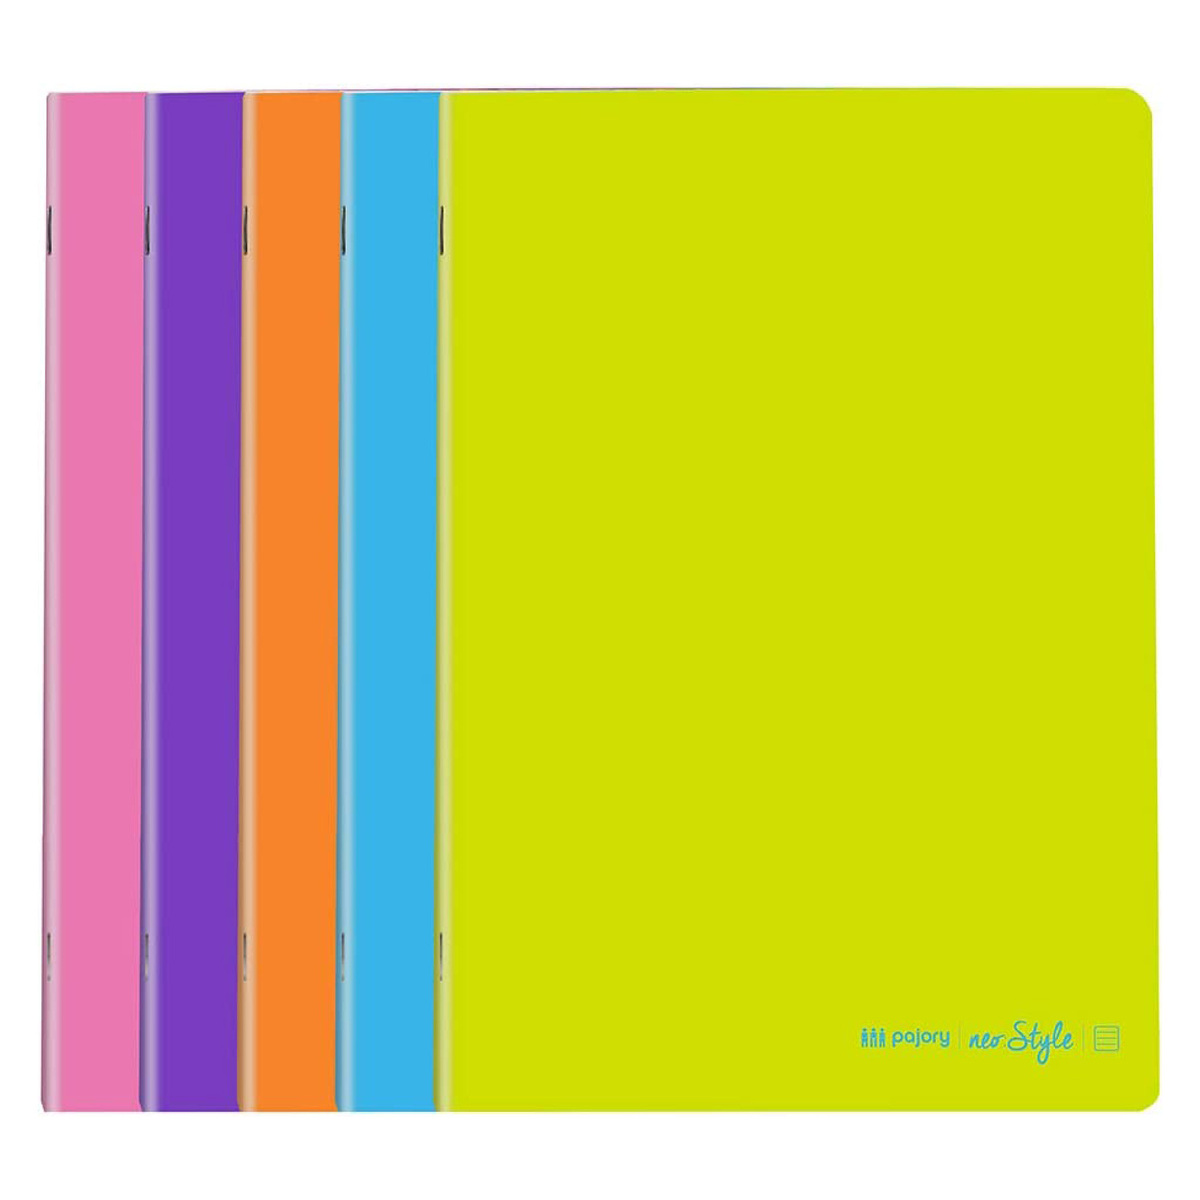 Maxi Glossy Neostyle A4 Size Notebook, 60 Sheets, MX-NEOSTYLEA4-NB